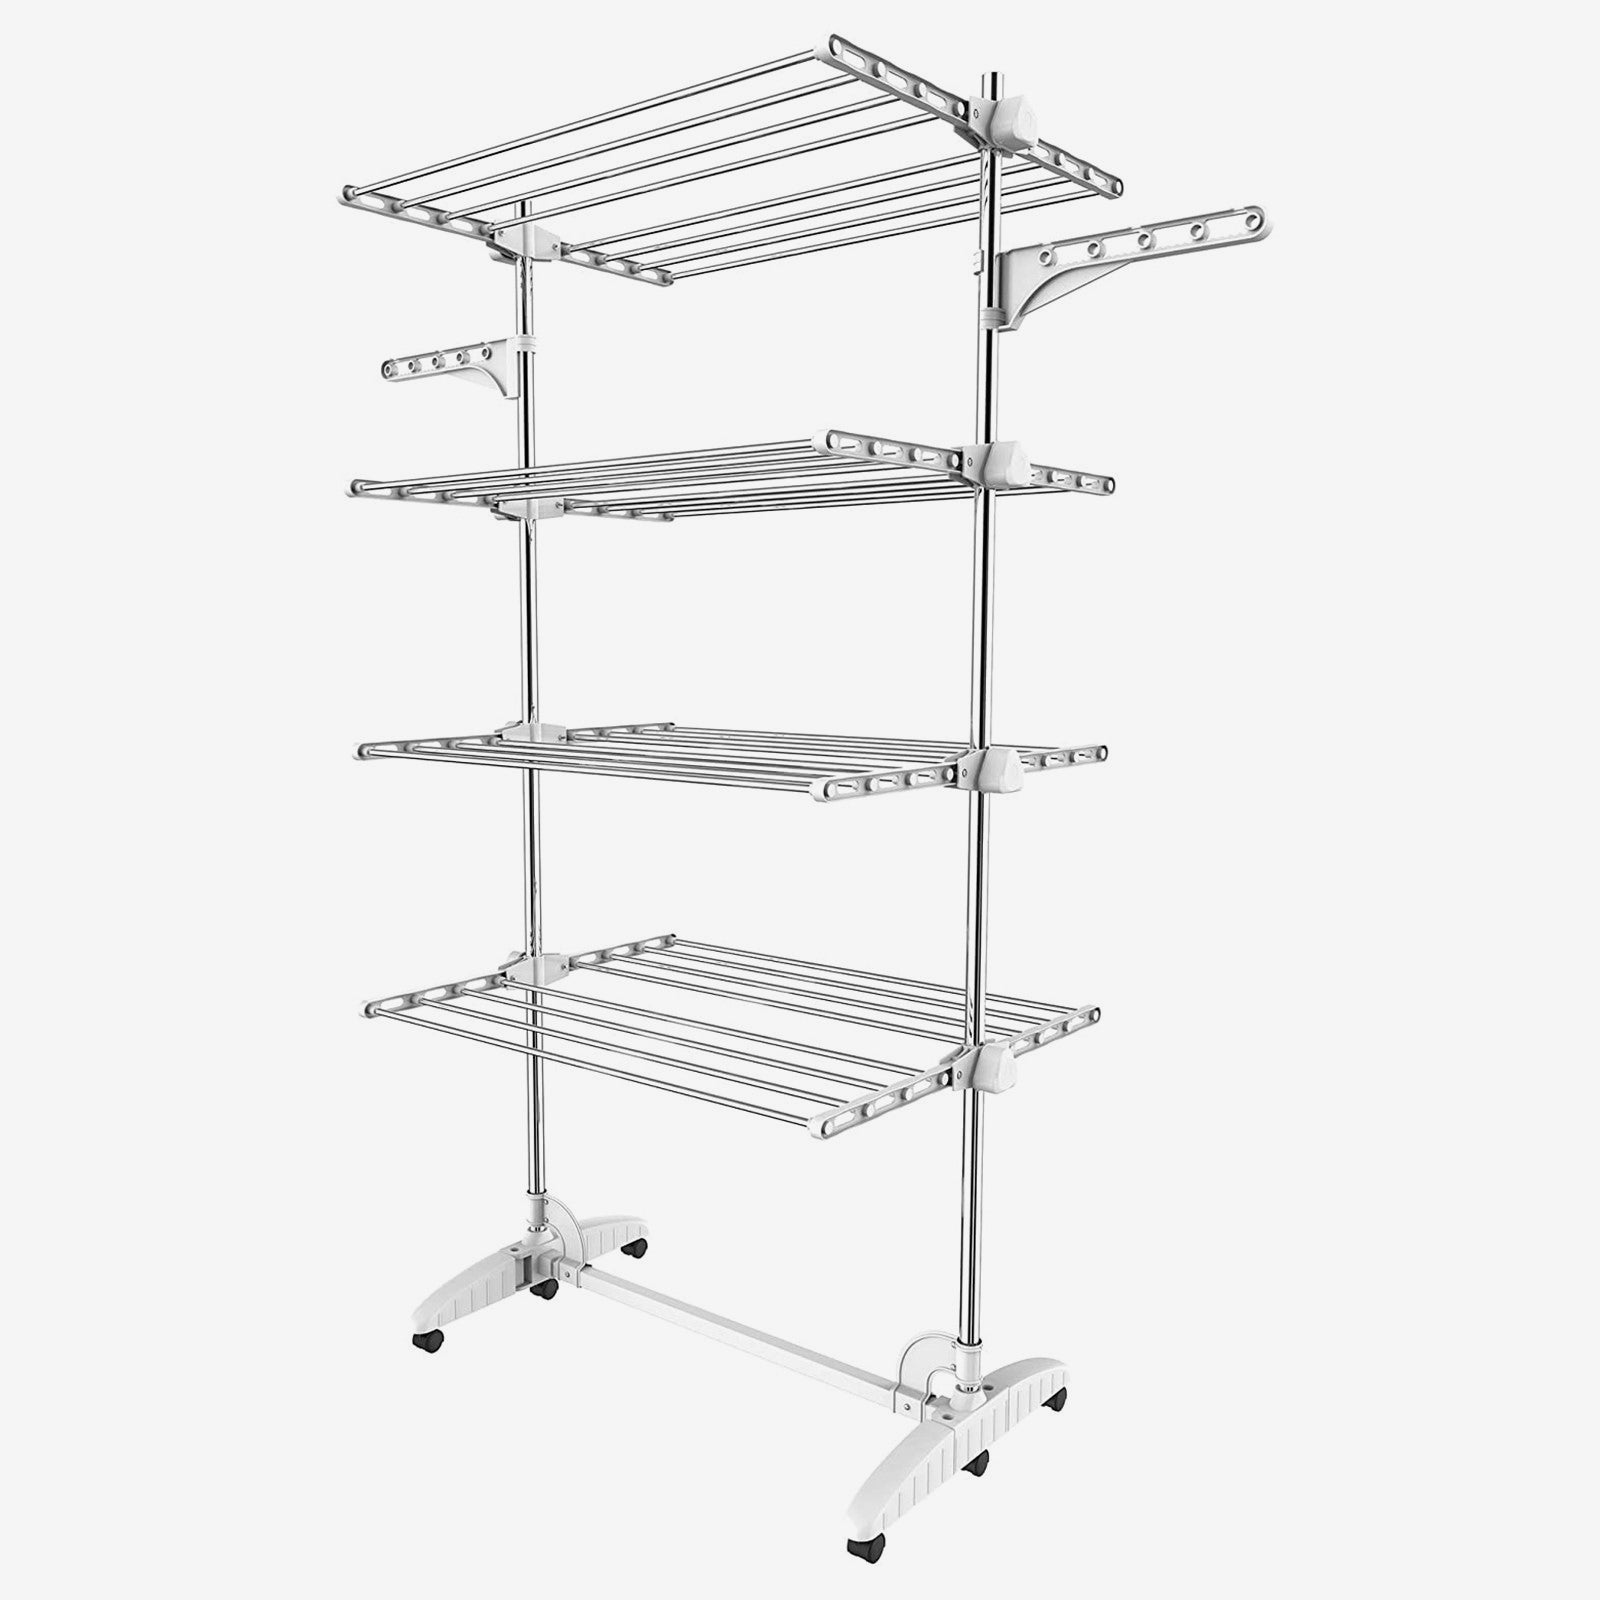 Clothes-Drying-Rack-4-shelves-White-Clothes-Drying-Rack-4-shelves-White-with-wings-Material-Stainless-steel-tubes